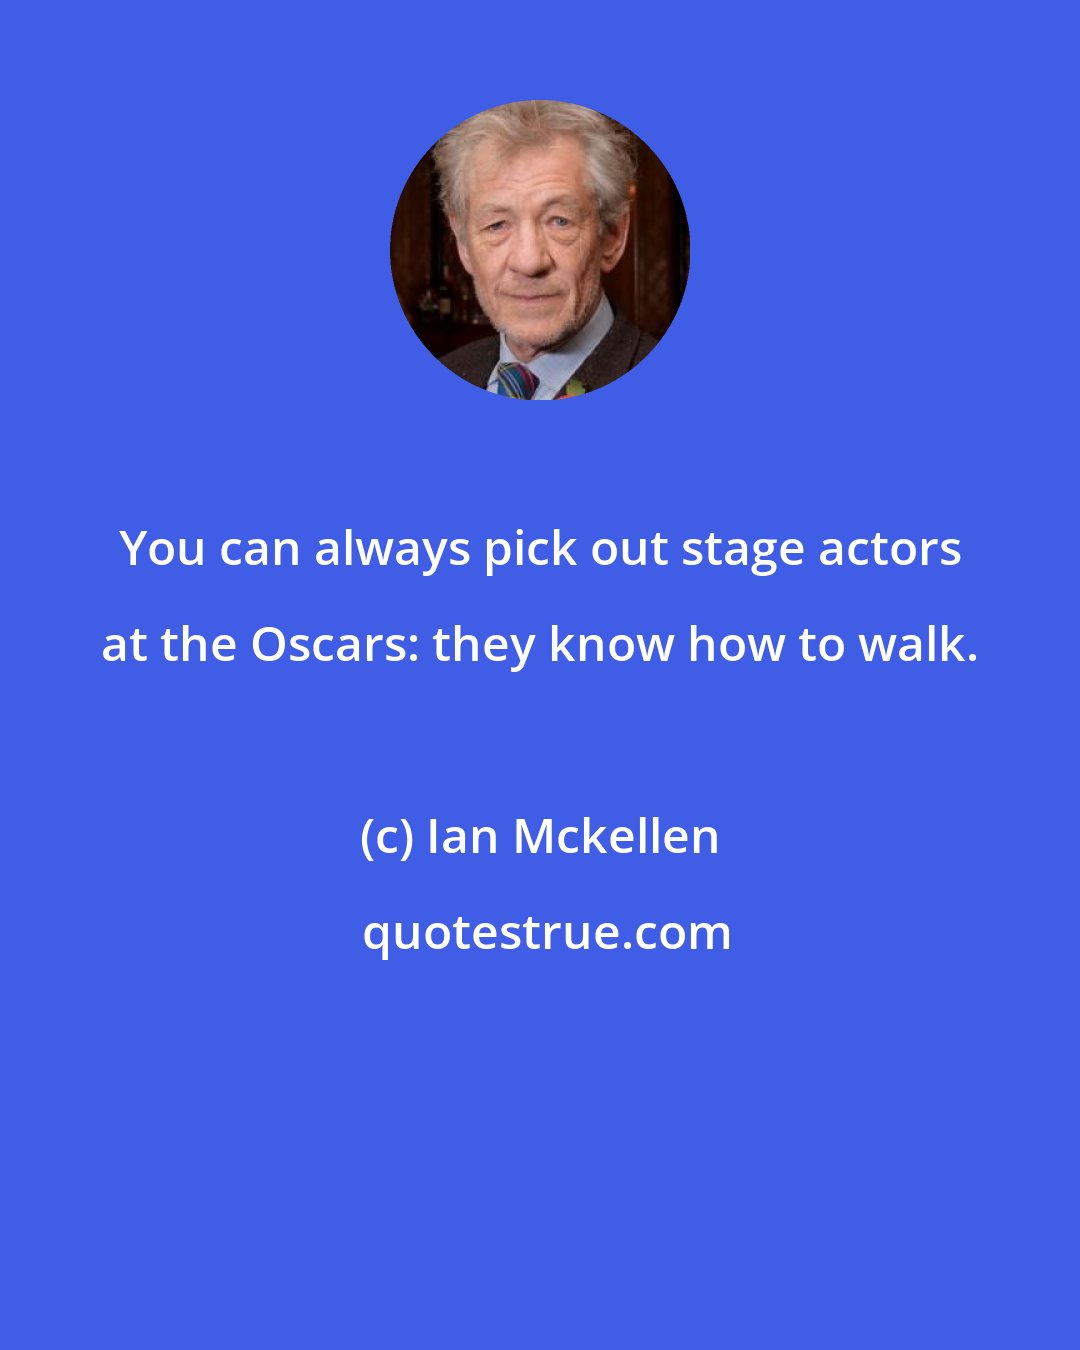 Ian Mckellen: You can always pick out stage actors at the Oscars: they know how to walk.